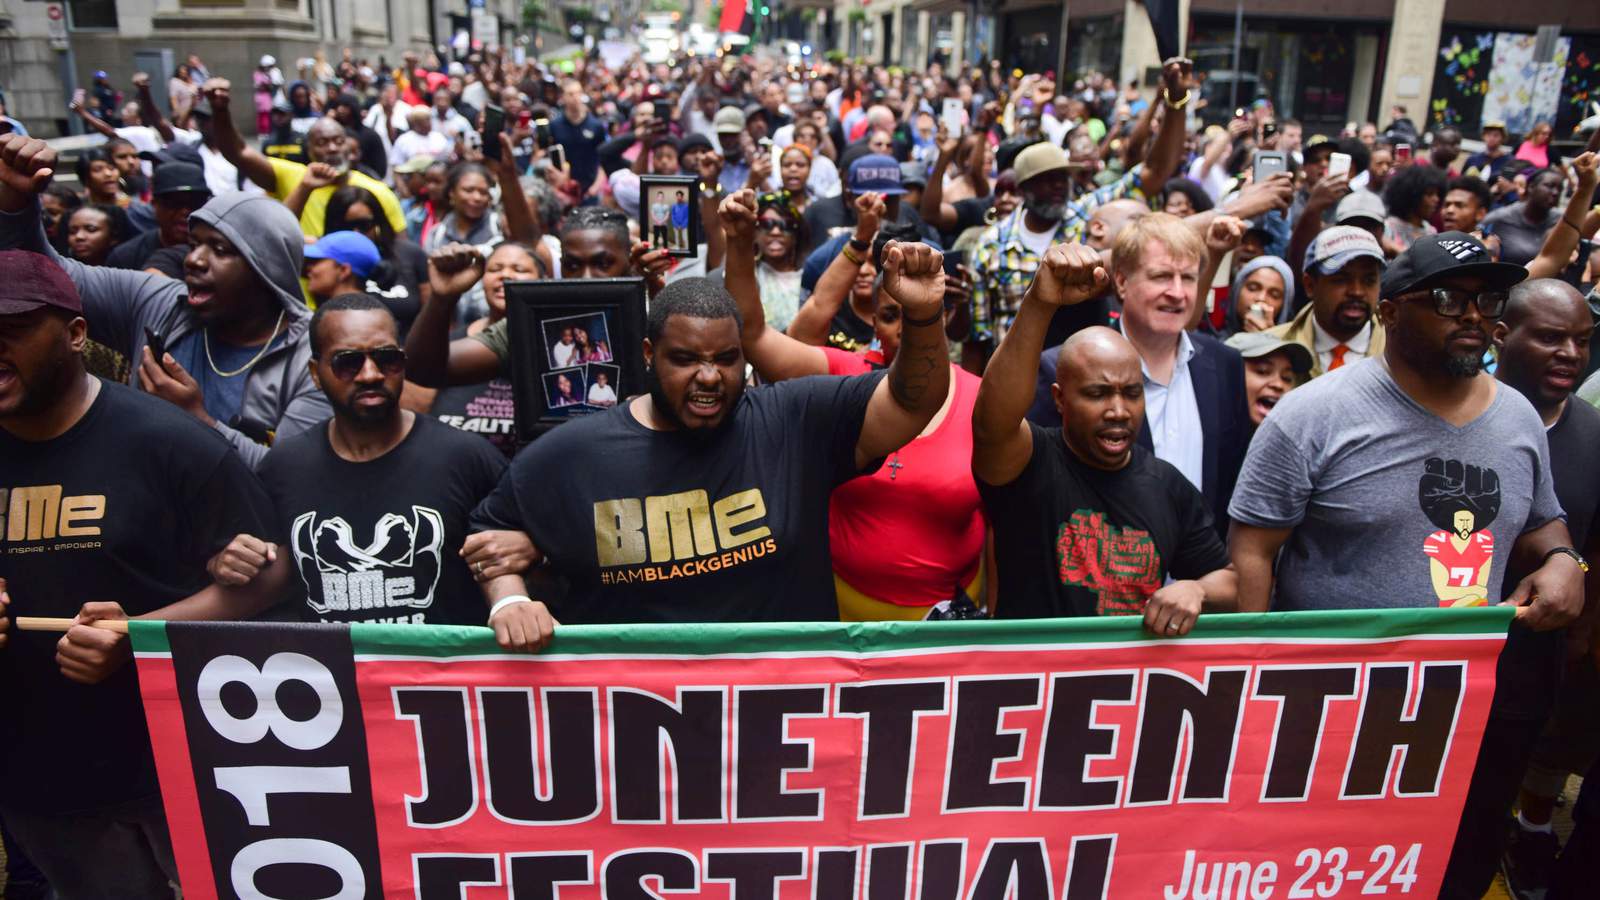 What to know about Juneteenth and why people are talking about it now